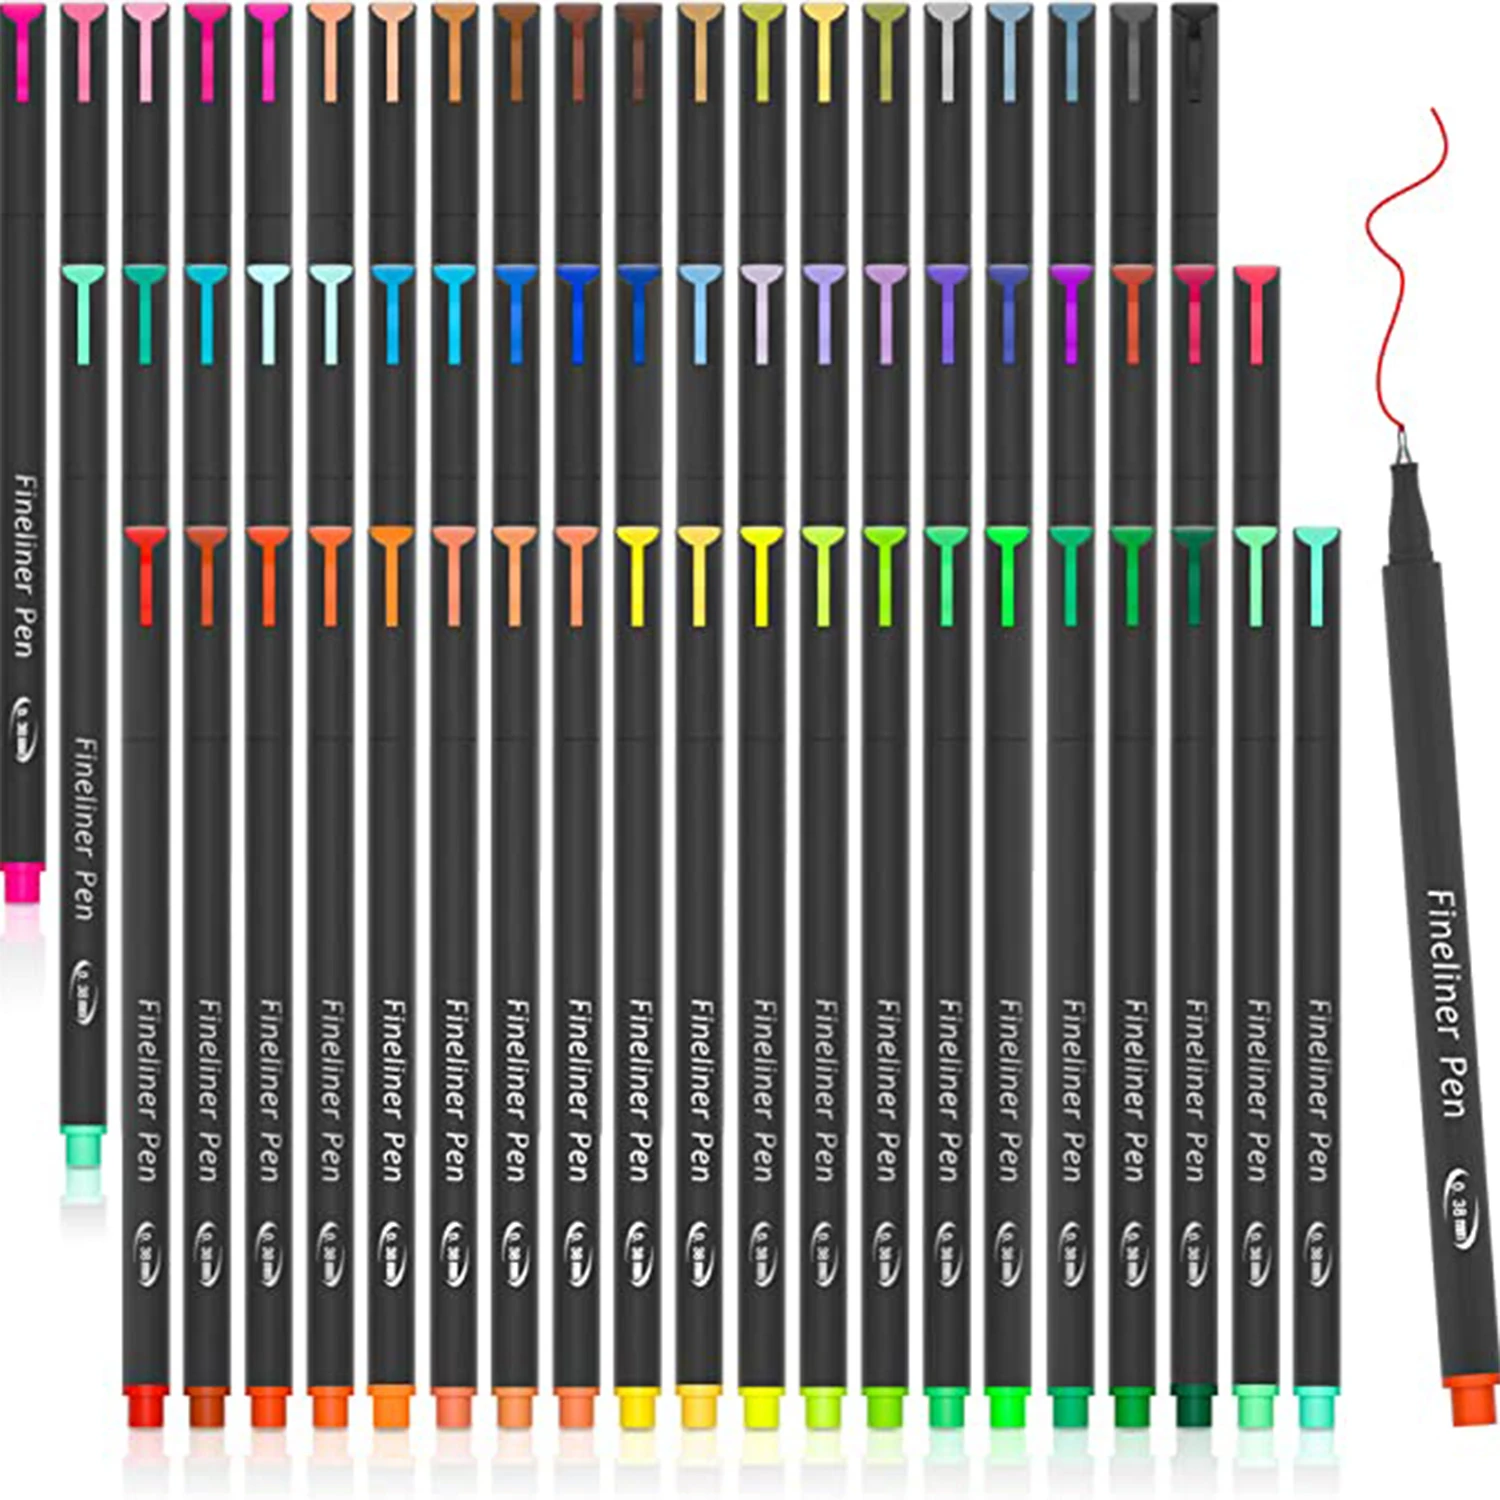 60 Vibrant Colors Journal Pens: Fineliner Pen for Note Taking, Bullet  Journaling, Art Projects & More!